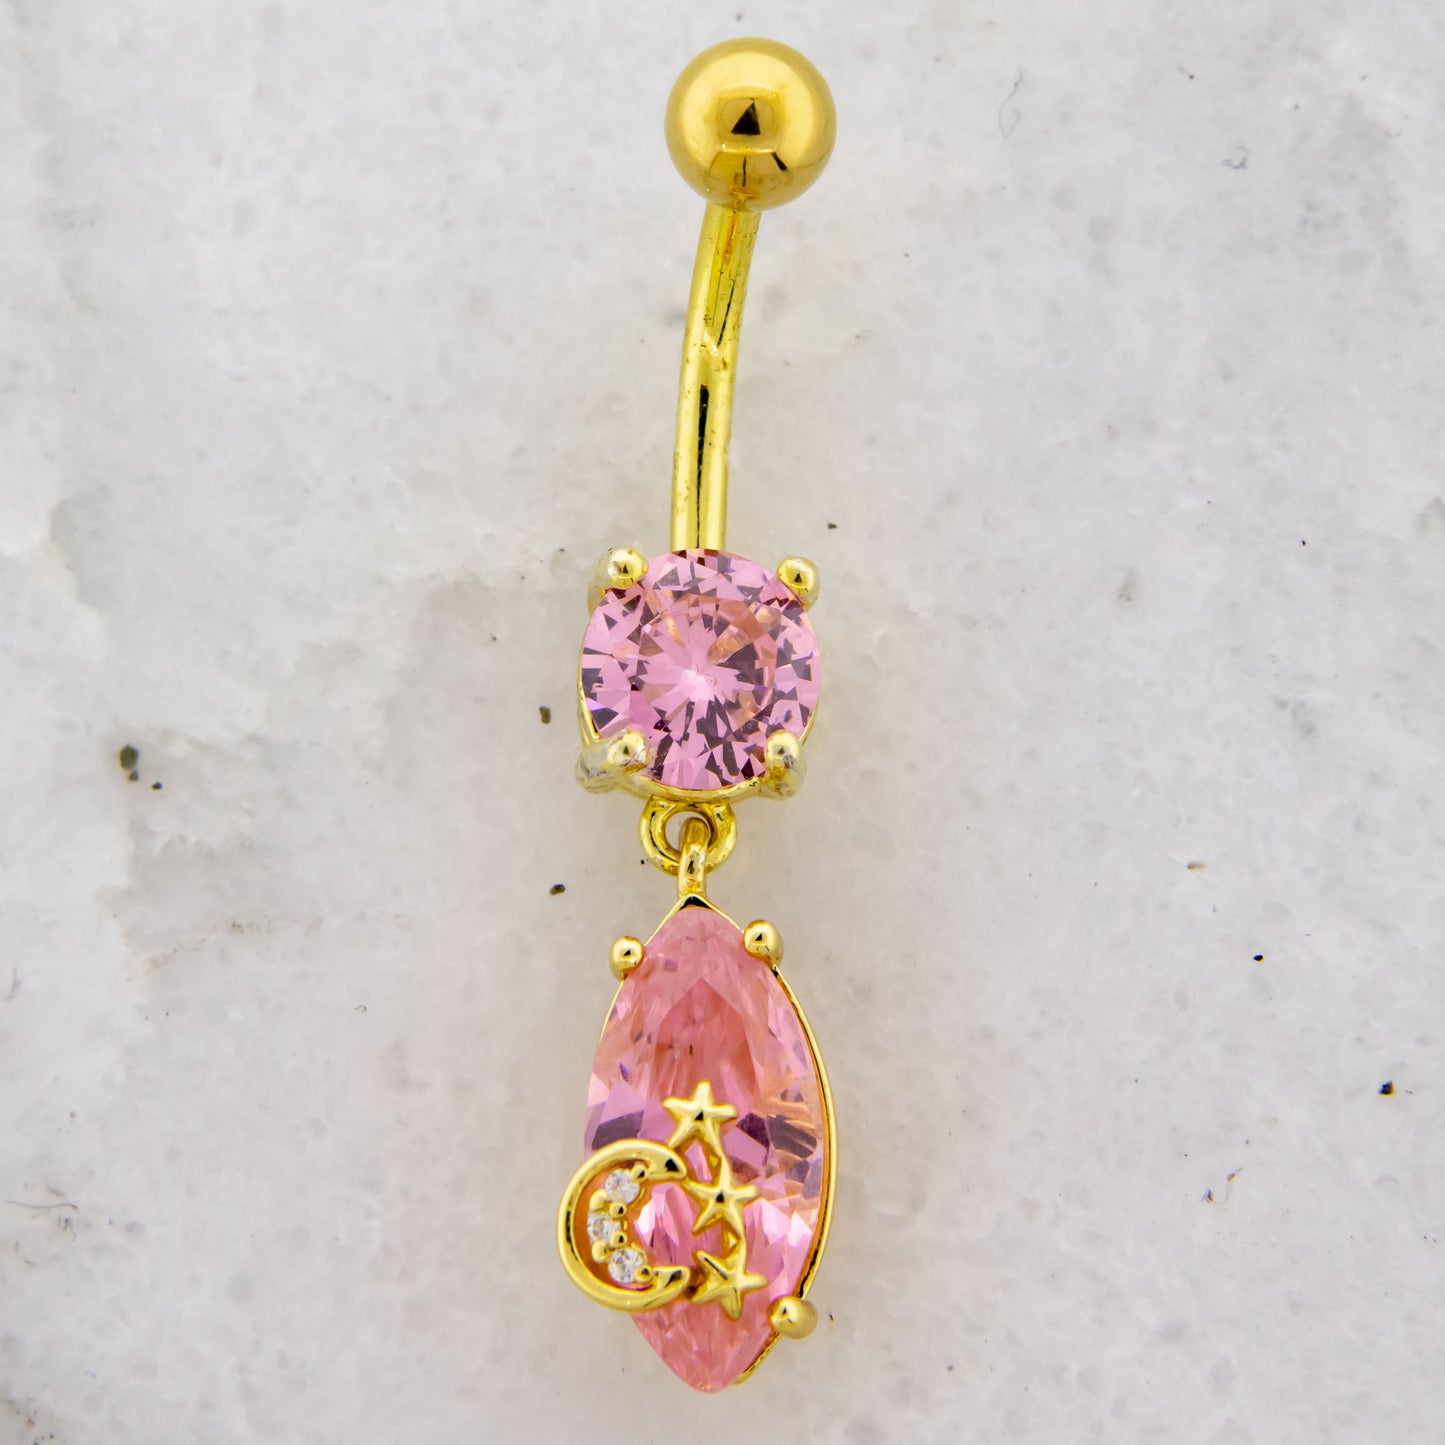 14G Pink Teardrop Gem With Moon and Stars Navel Ring - Pierced Addiction